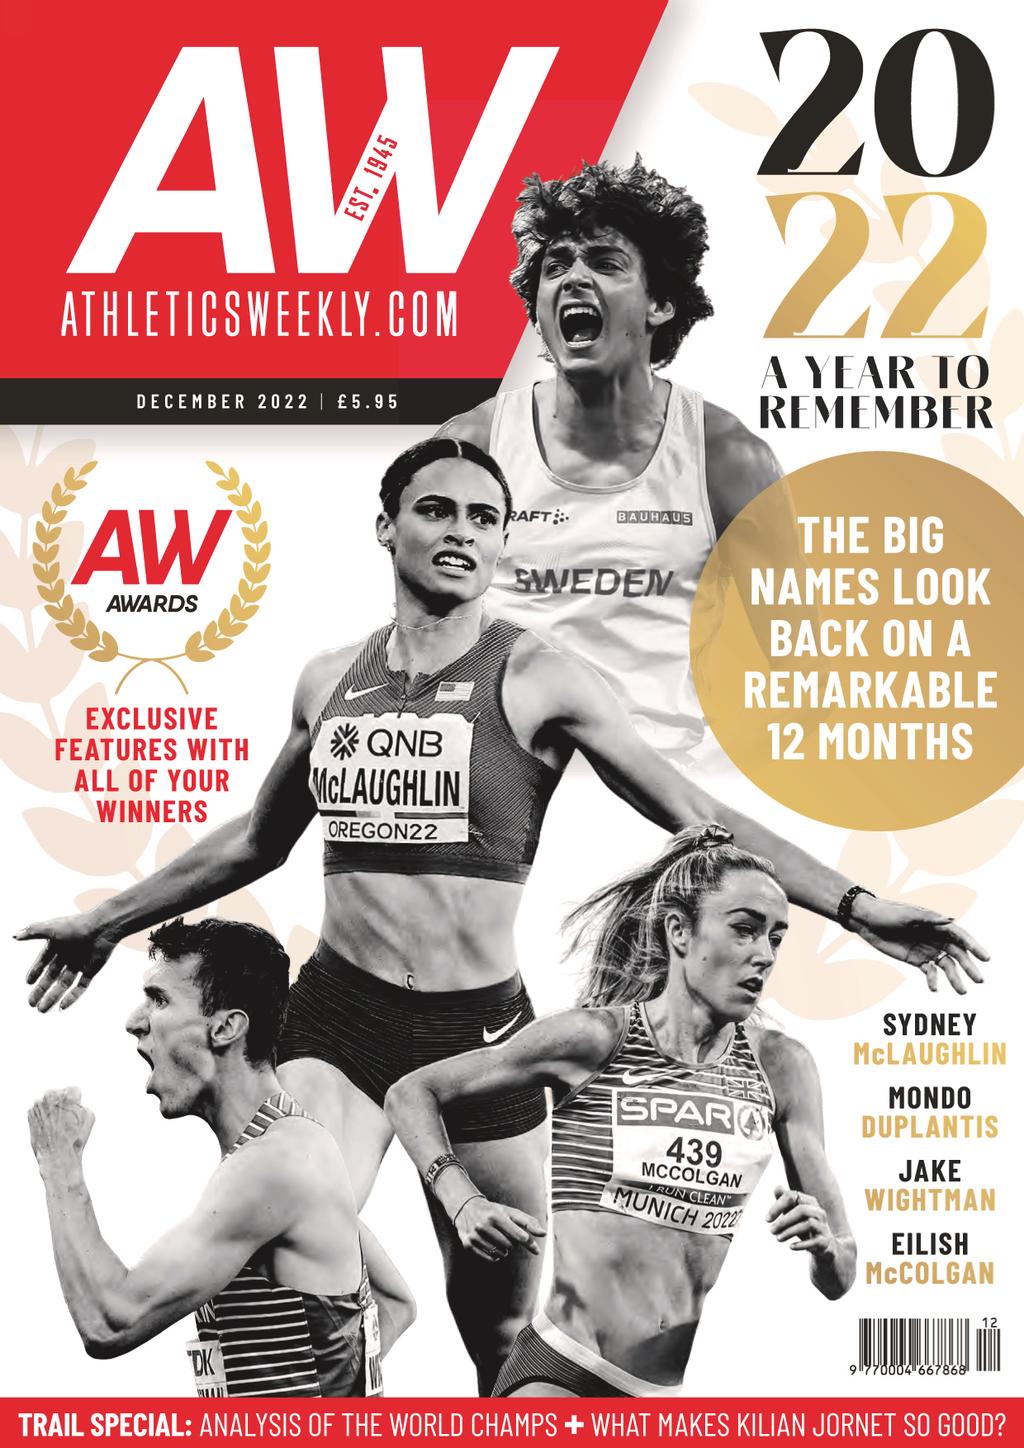 497866 Aw Athletics Weekly Cover 2022 December 1 Issue 